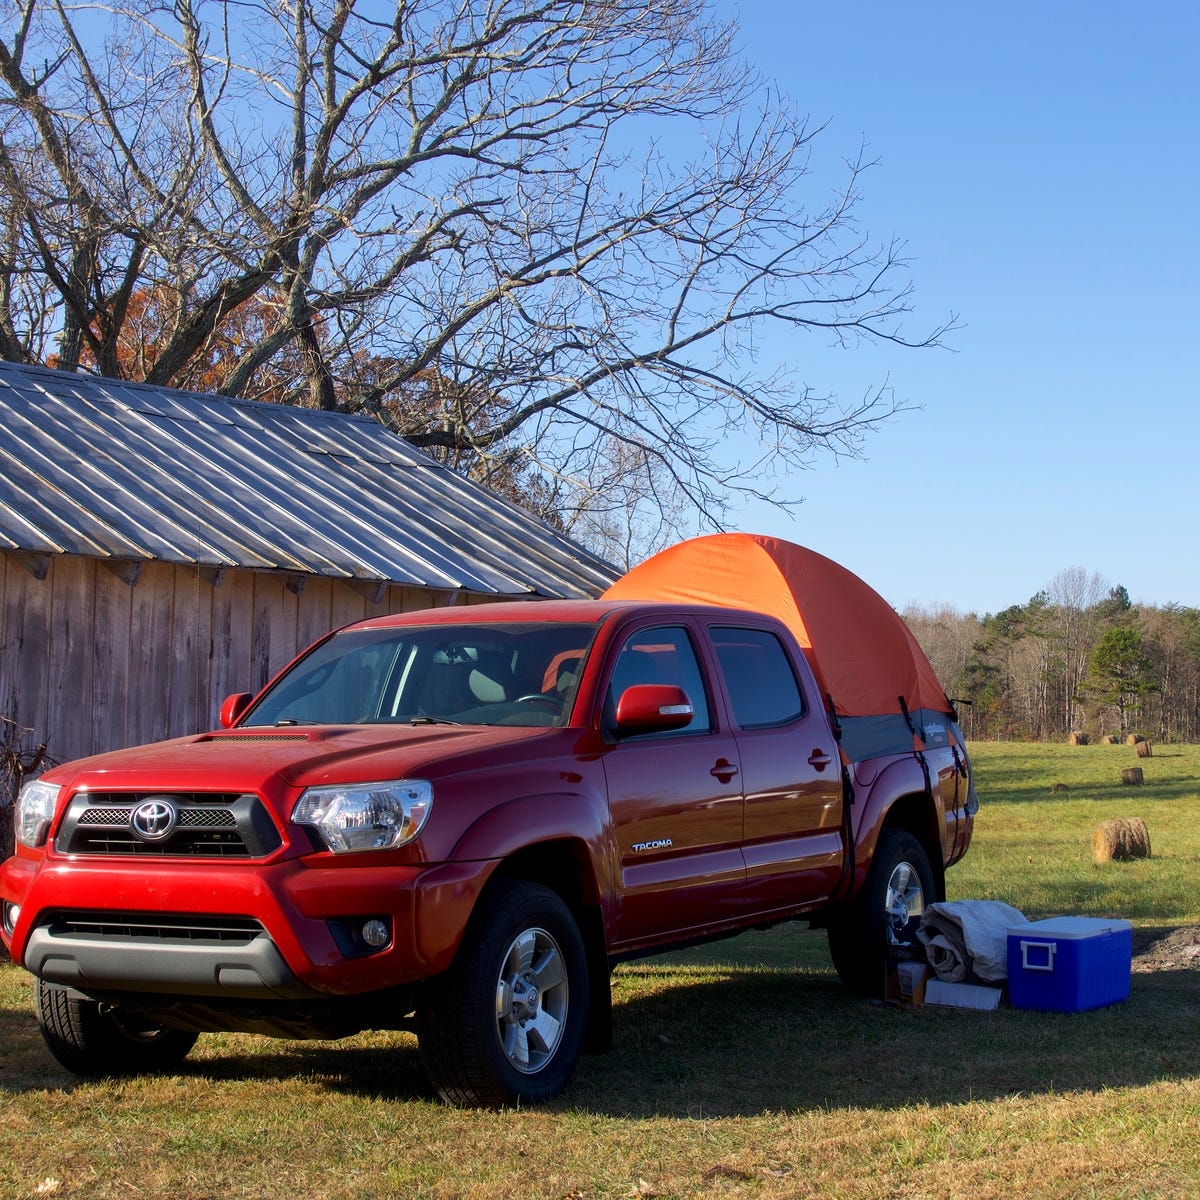 3 tips for going camping in your car - CNET